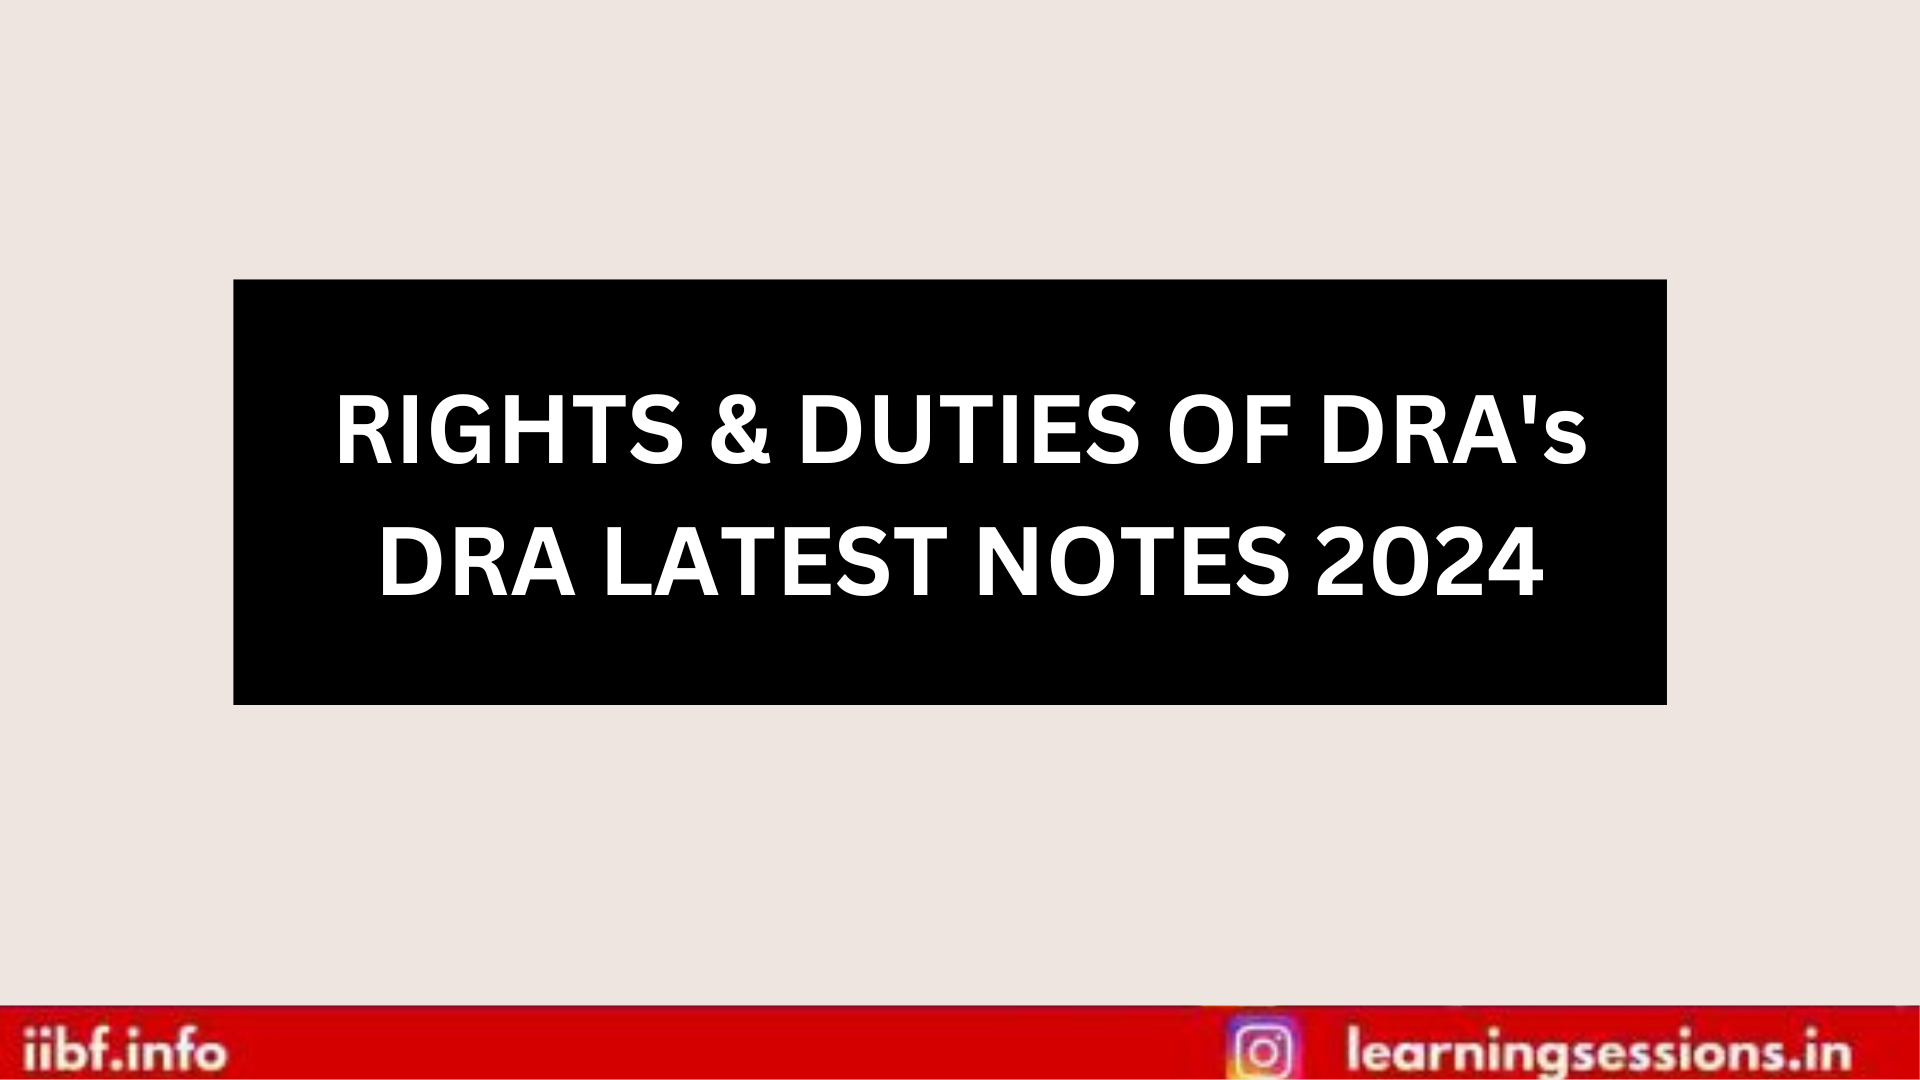 RIGHTS & DUTIES OF DRA's DRA LATEST NOTES 2024